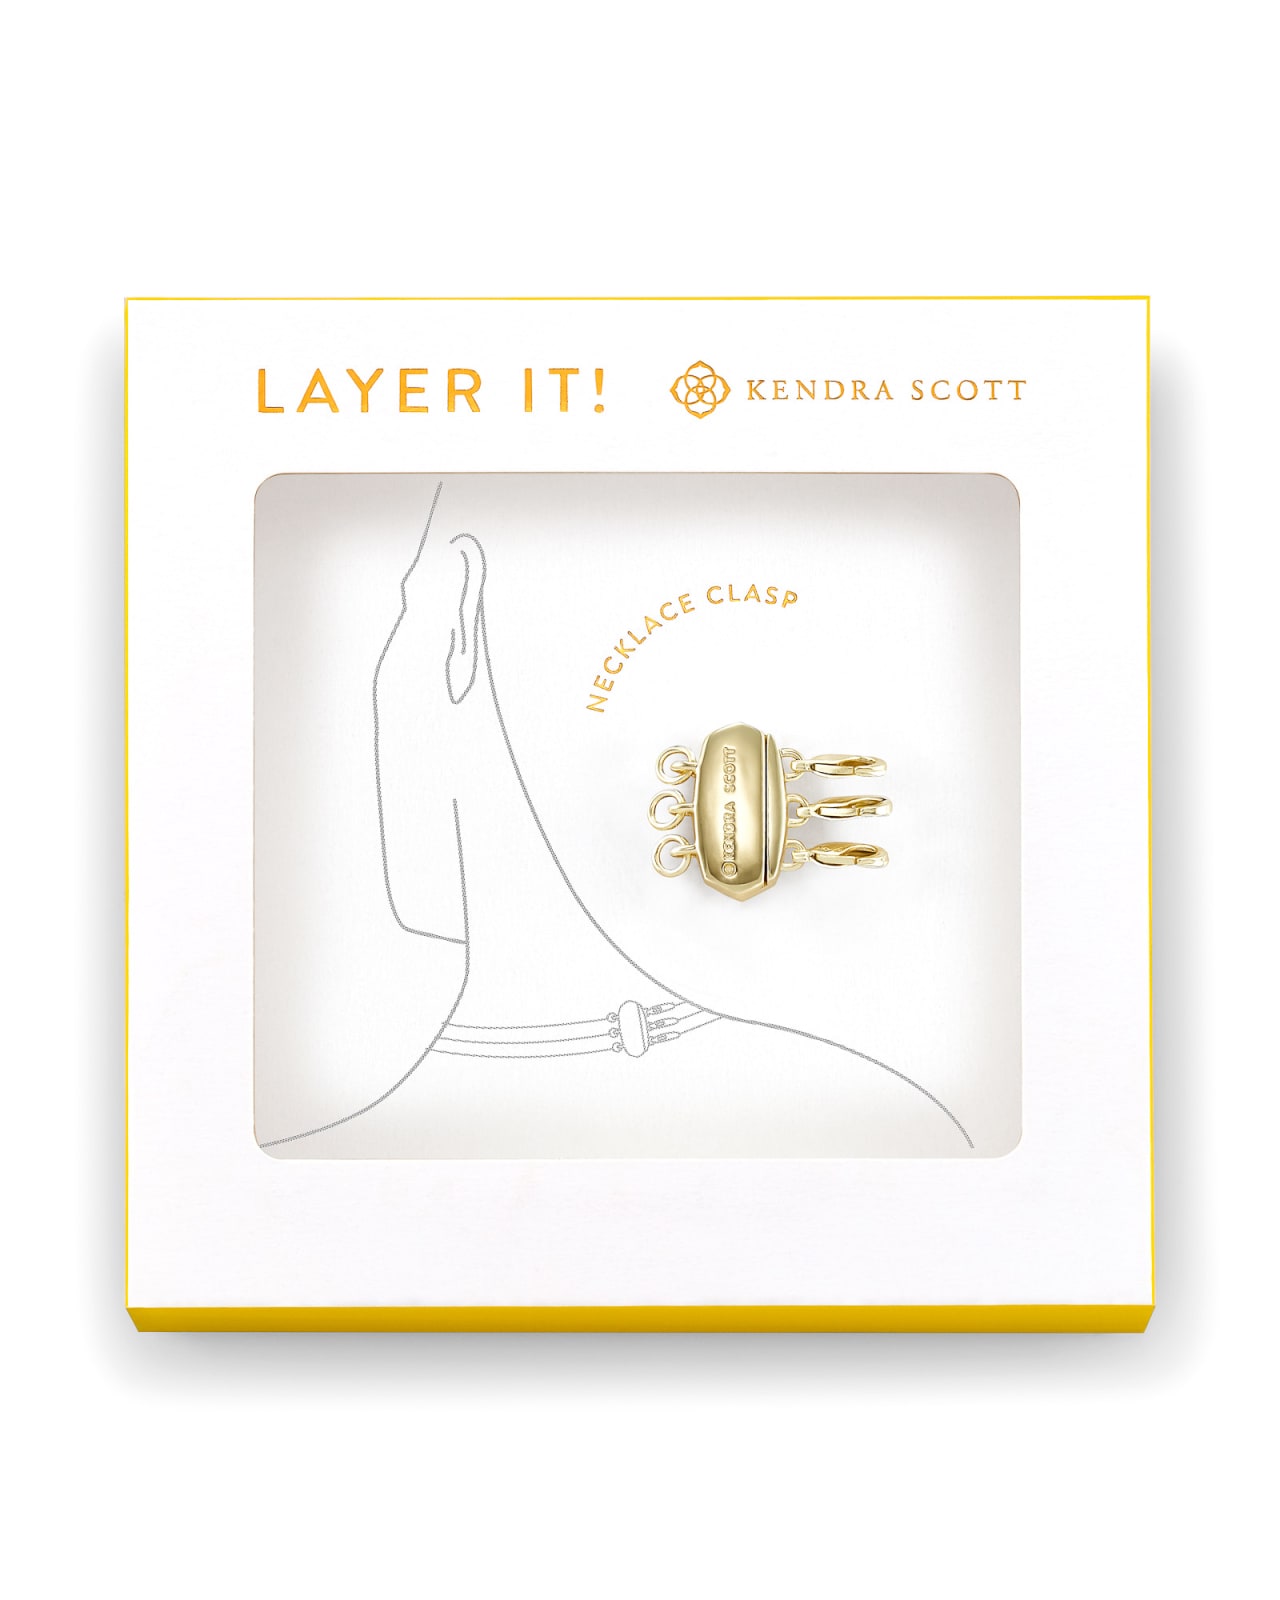 Layer It! Necklace Clasp in Gold | Kendra Scott